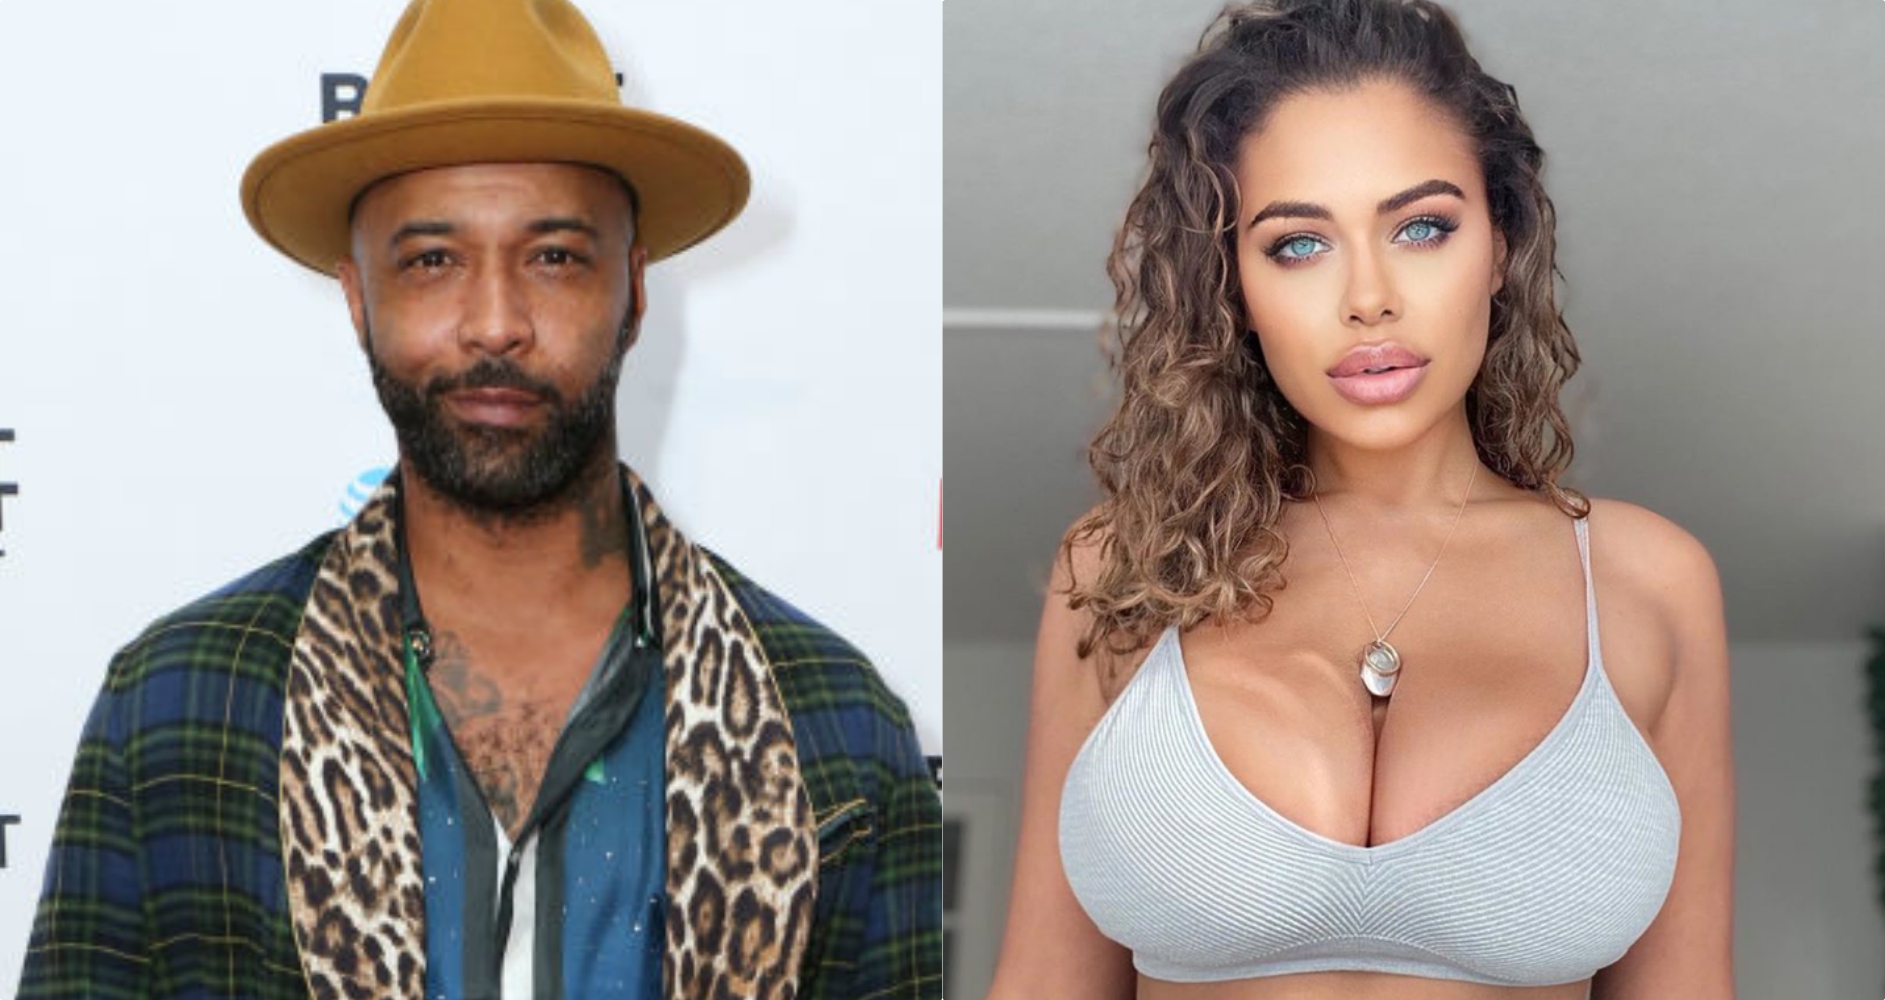 Joe Budden Says He Took A 1st Date To A Swingers Club pic